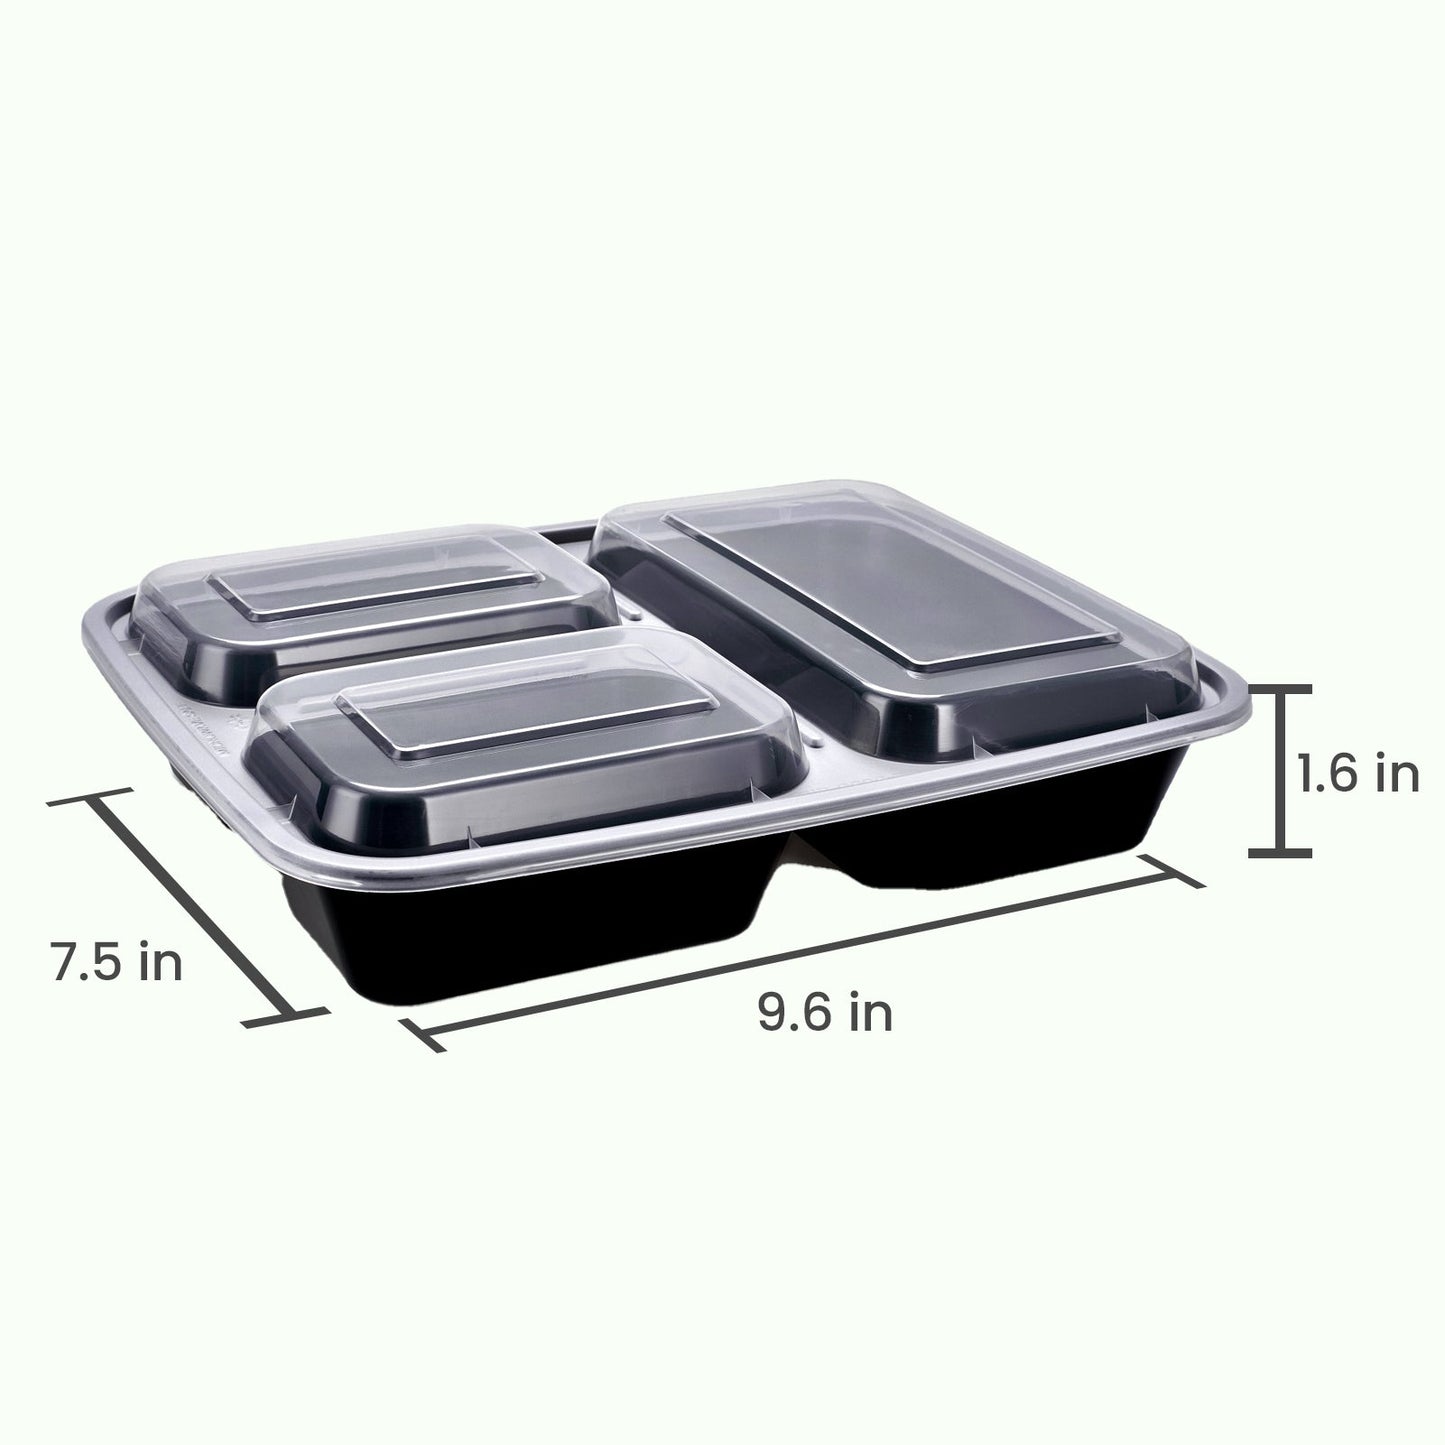 Meal Prep Containers Bento Box 12-pc. 3-Compartment Container Set*2